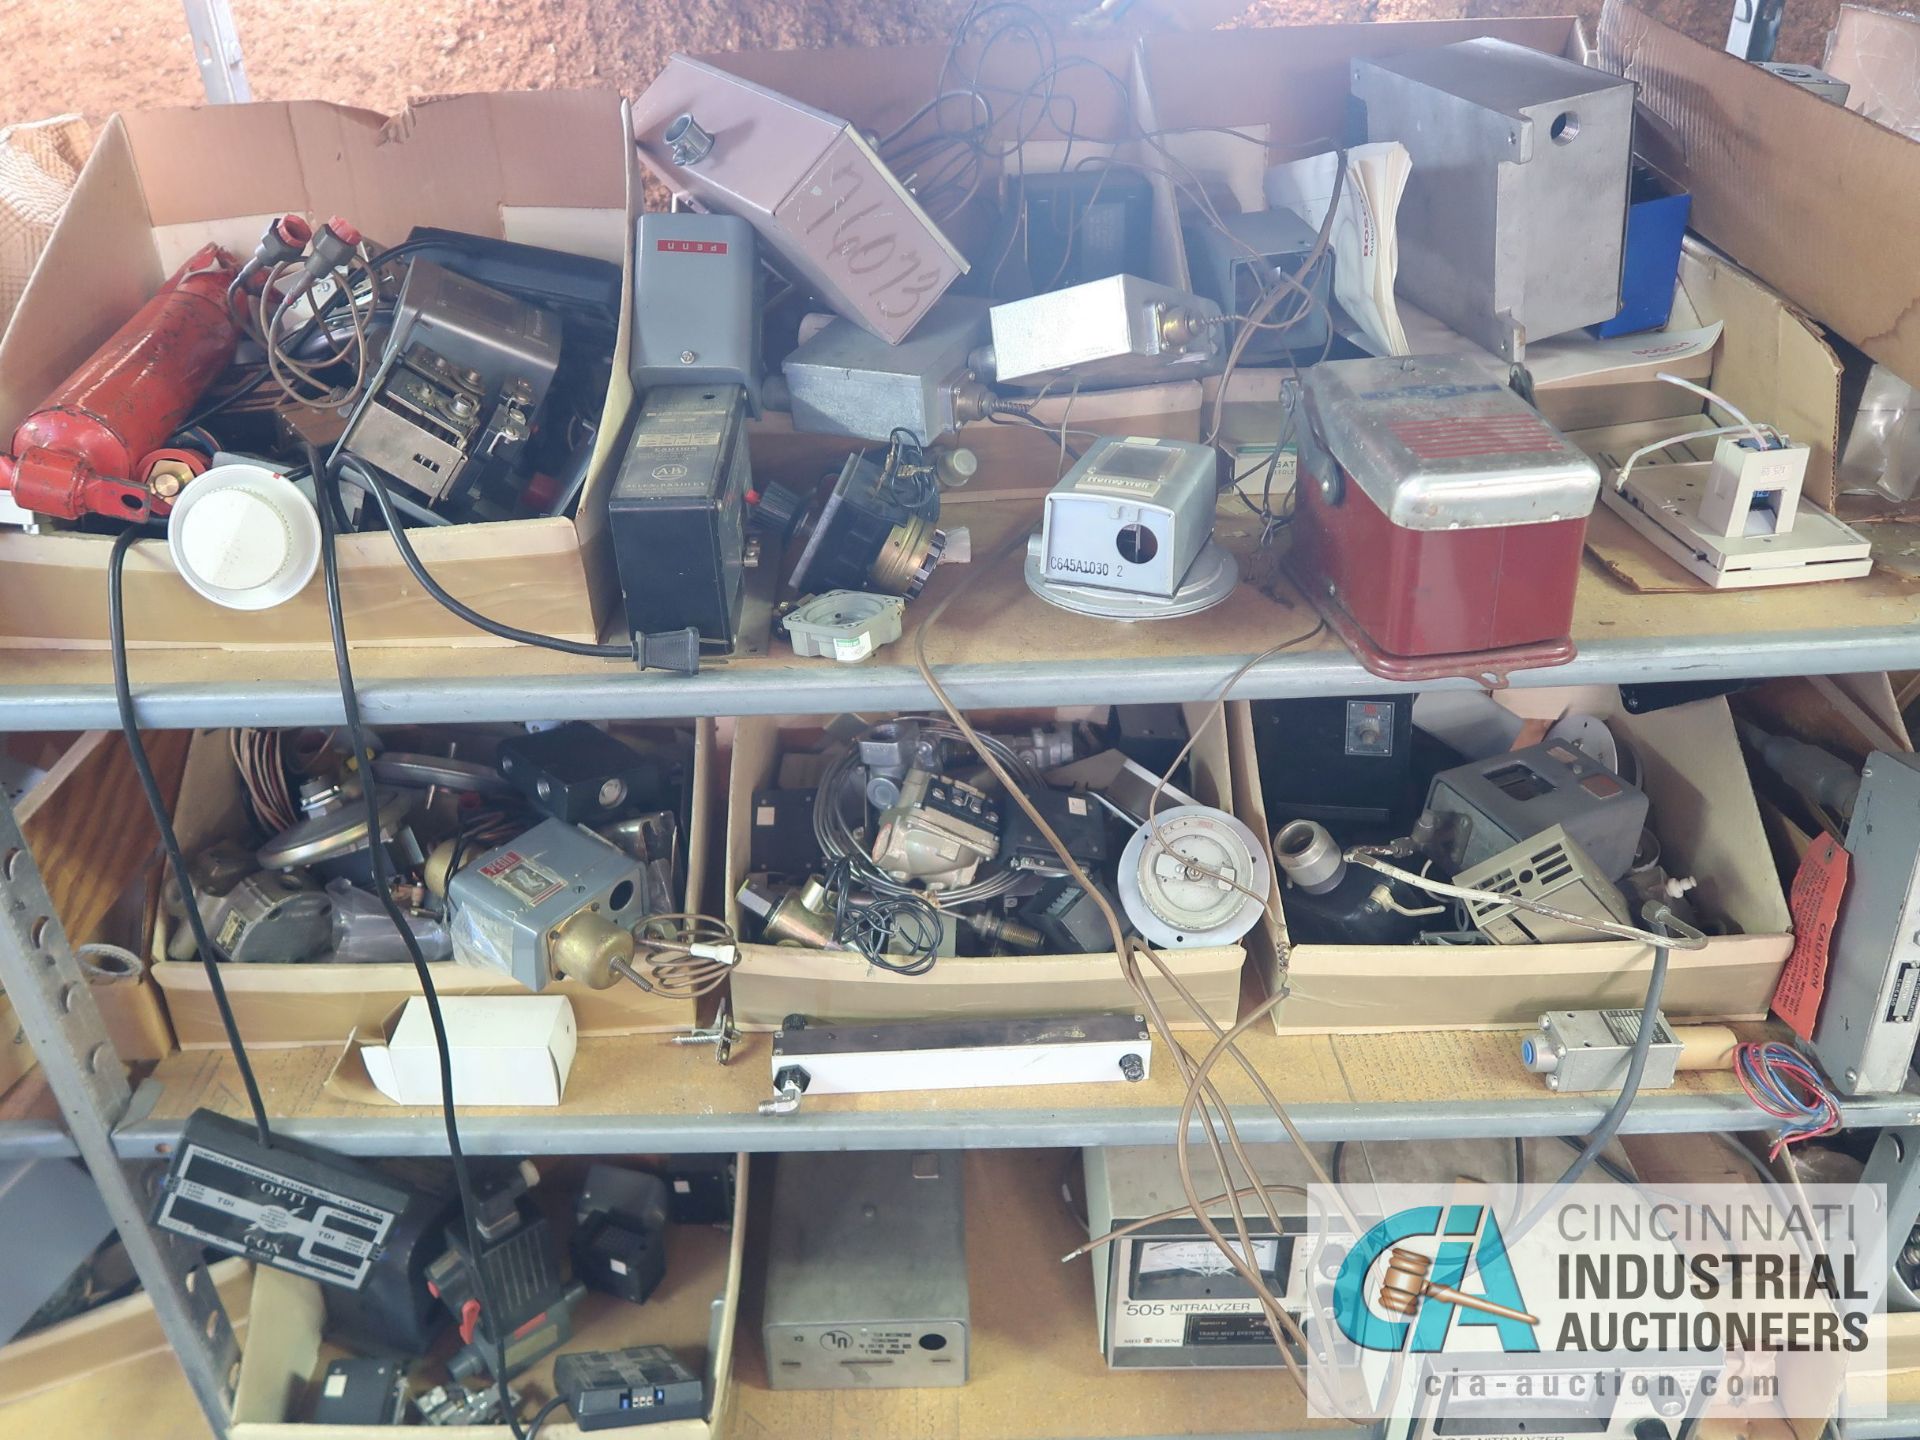 CONTENTS OF (16) SHELVES INCLUDING MISCELLANEOUS VALVES, THERMOSTATS, ANALYZERS, ELECTRICAL, CONTROL - Image 8 of 47